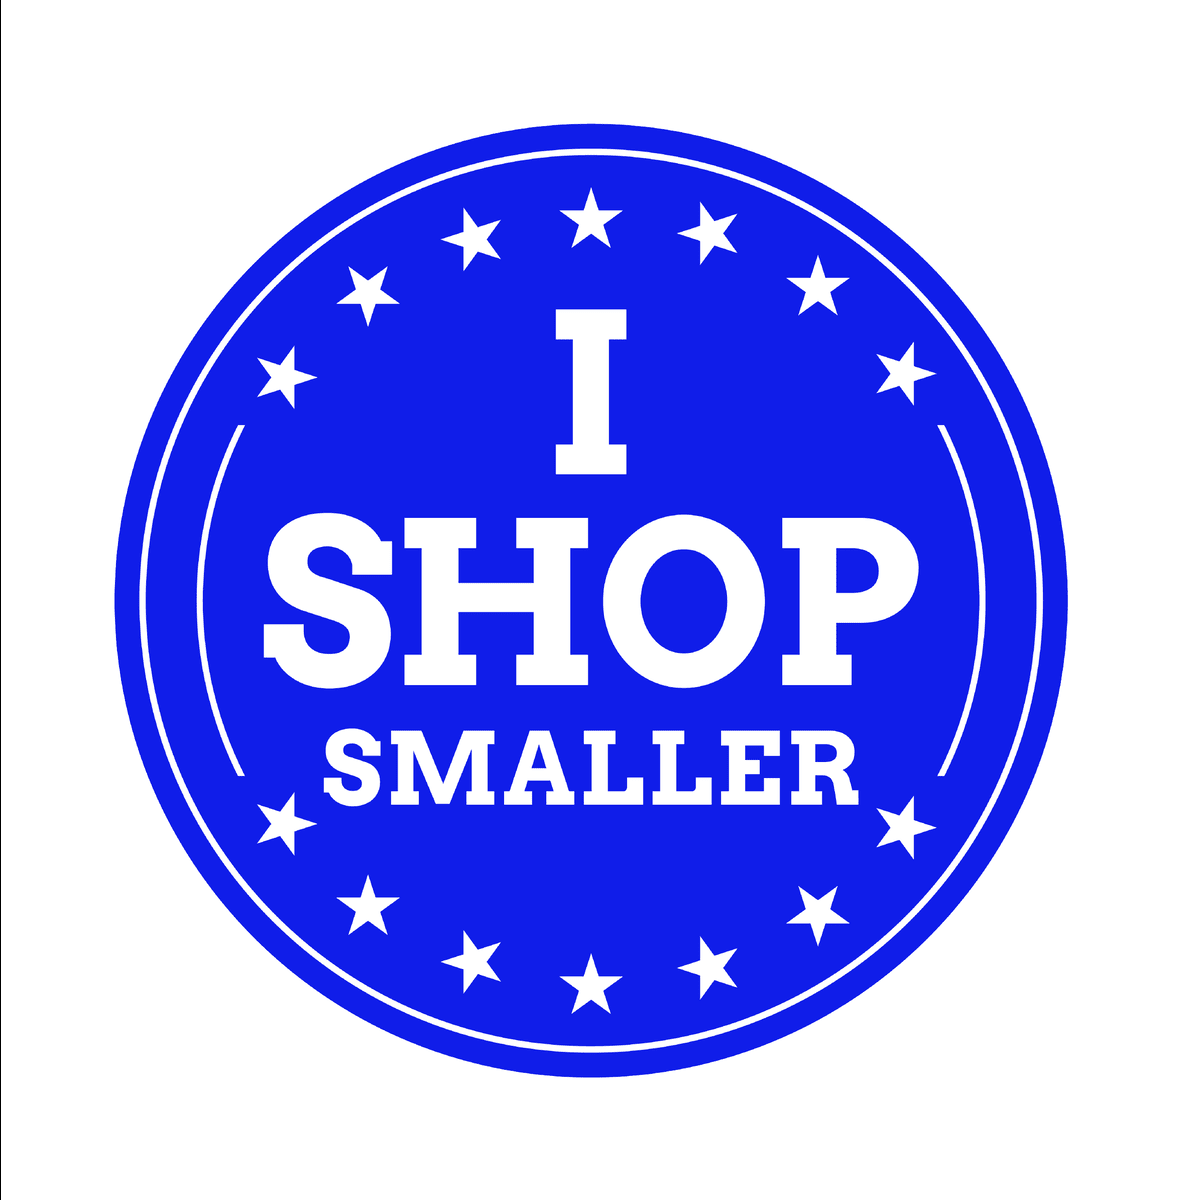 Hire Shopify Experts to integrate Shop Smaller ‑ Free Sticker app into a Shopify store